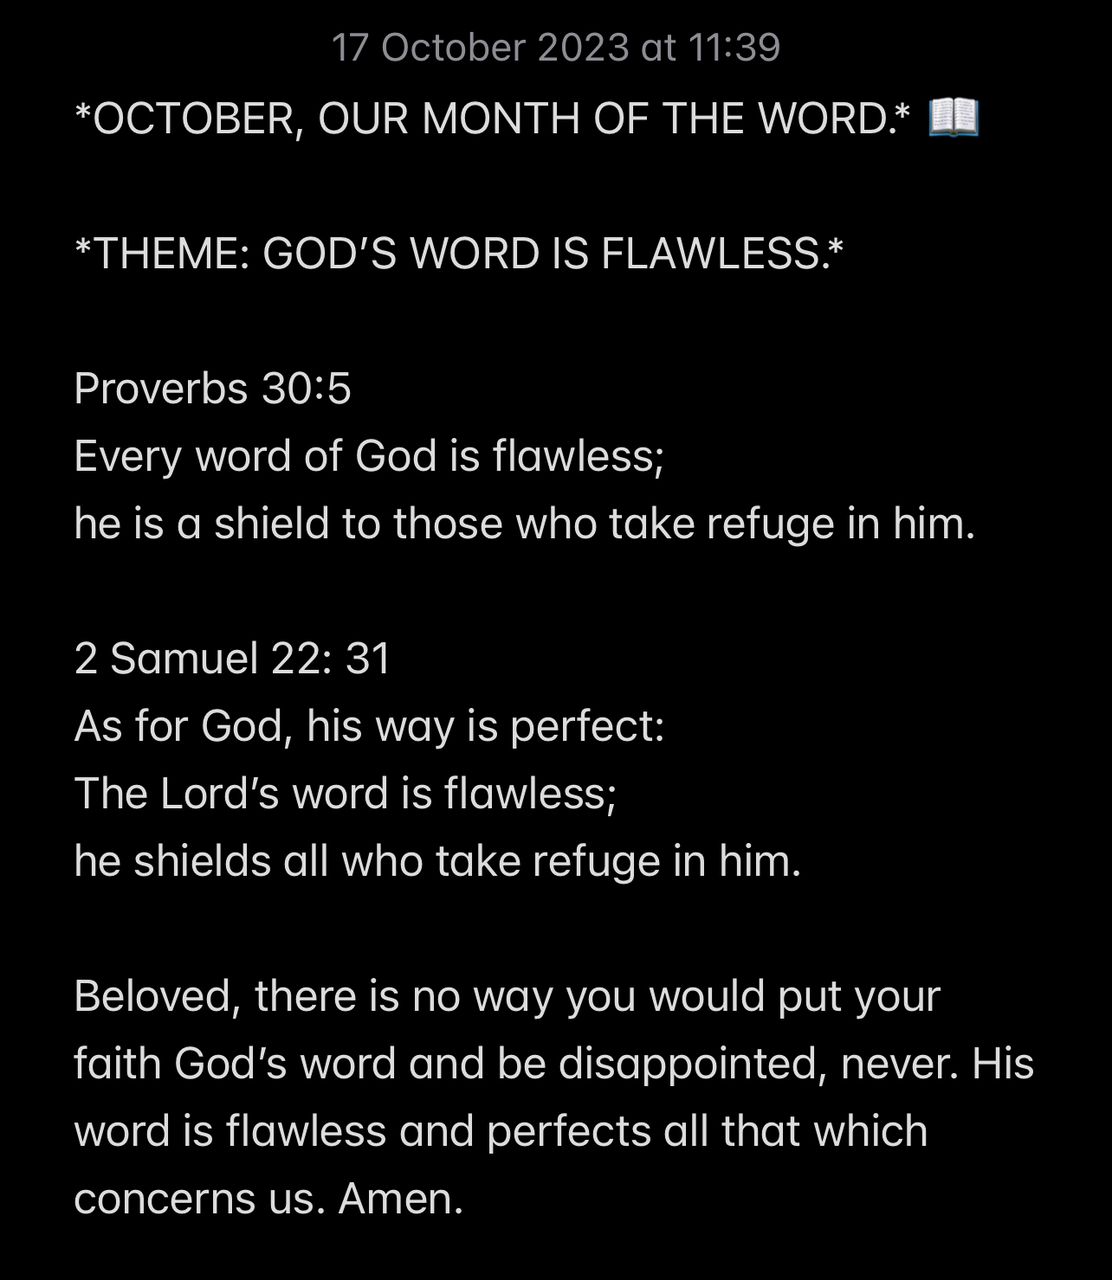 GOD’S WORD IS FLAWLESS.